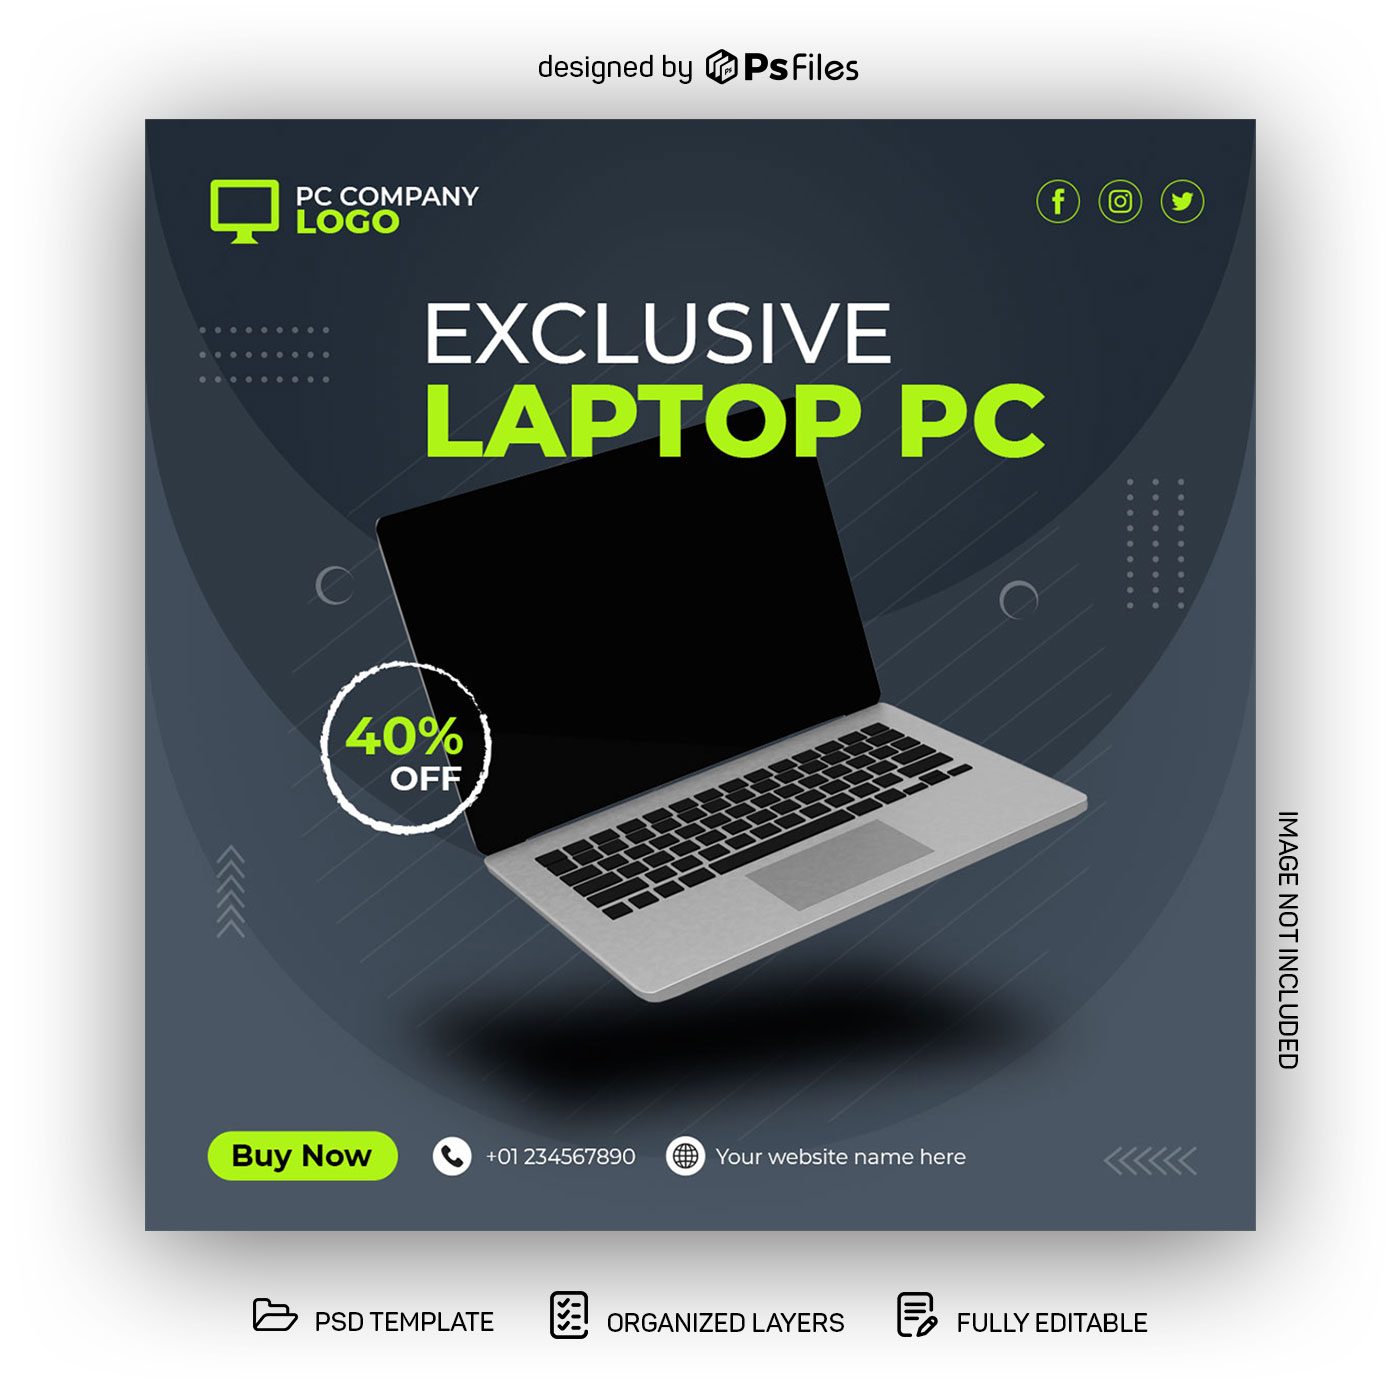 PsFiles Free Instagram Post Design Template for Laptop Offer Sale